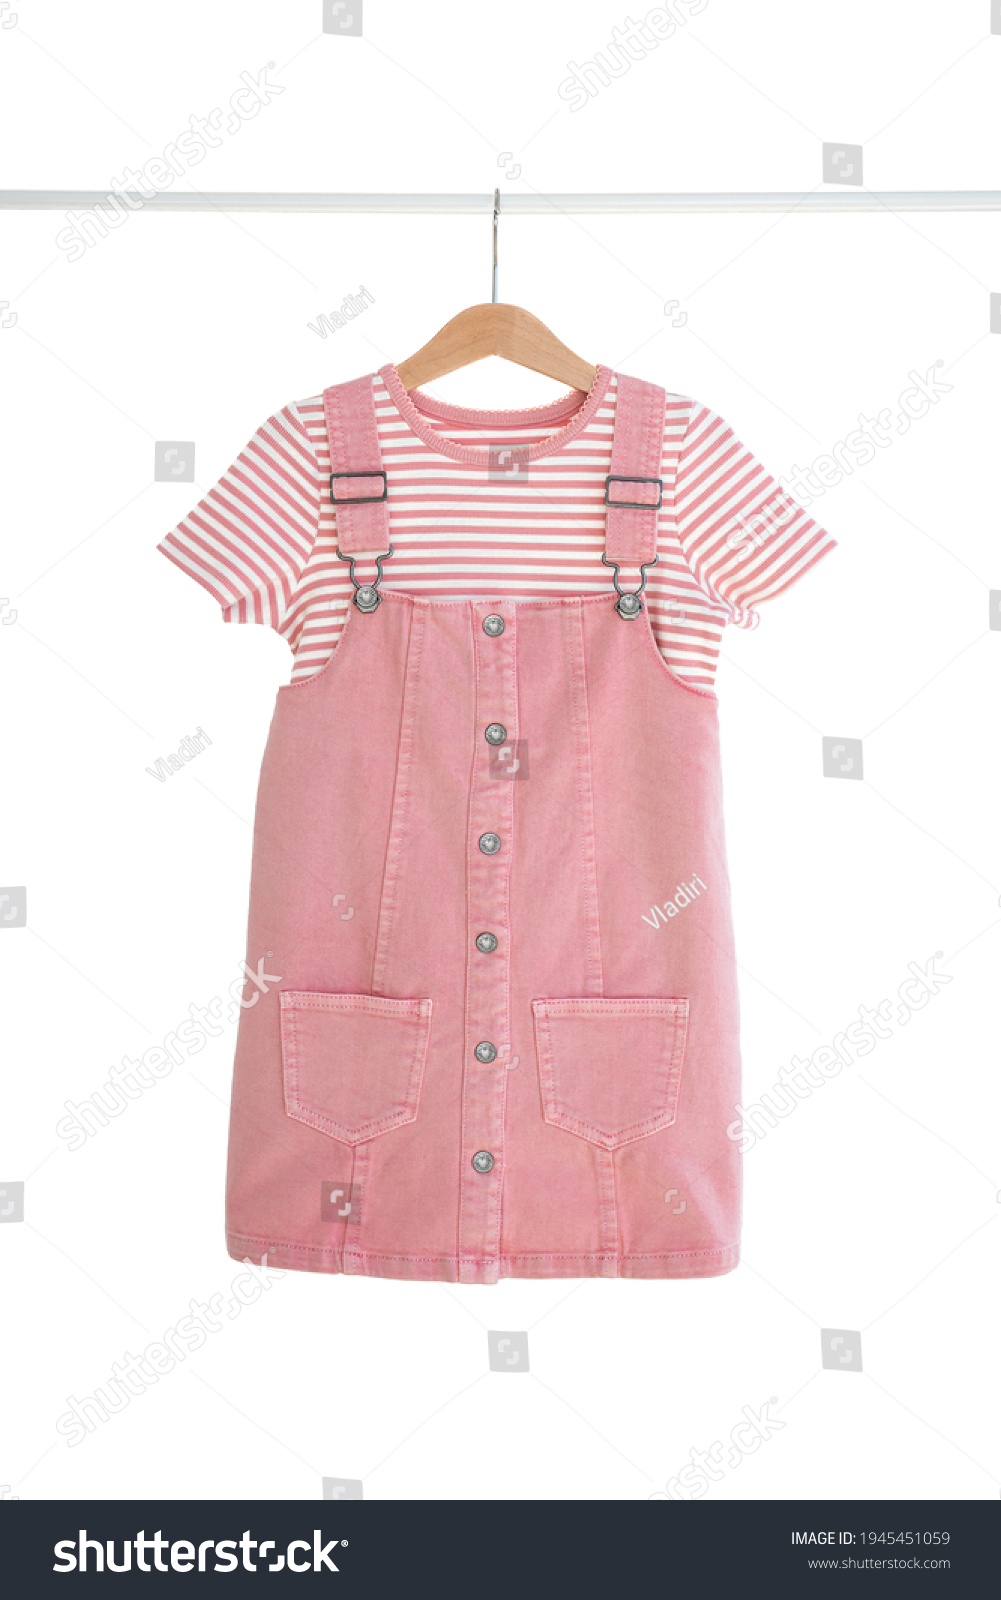 Fashionable women's kids dress and t-shirt hanging on hangers isolated on white background, girl's clothes set #1945451059